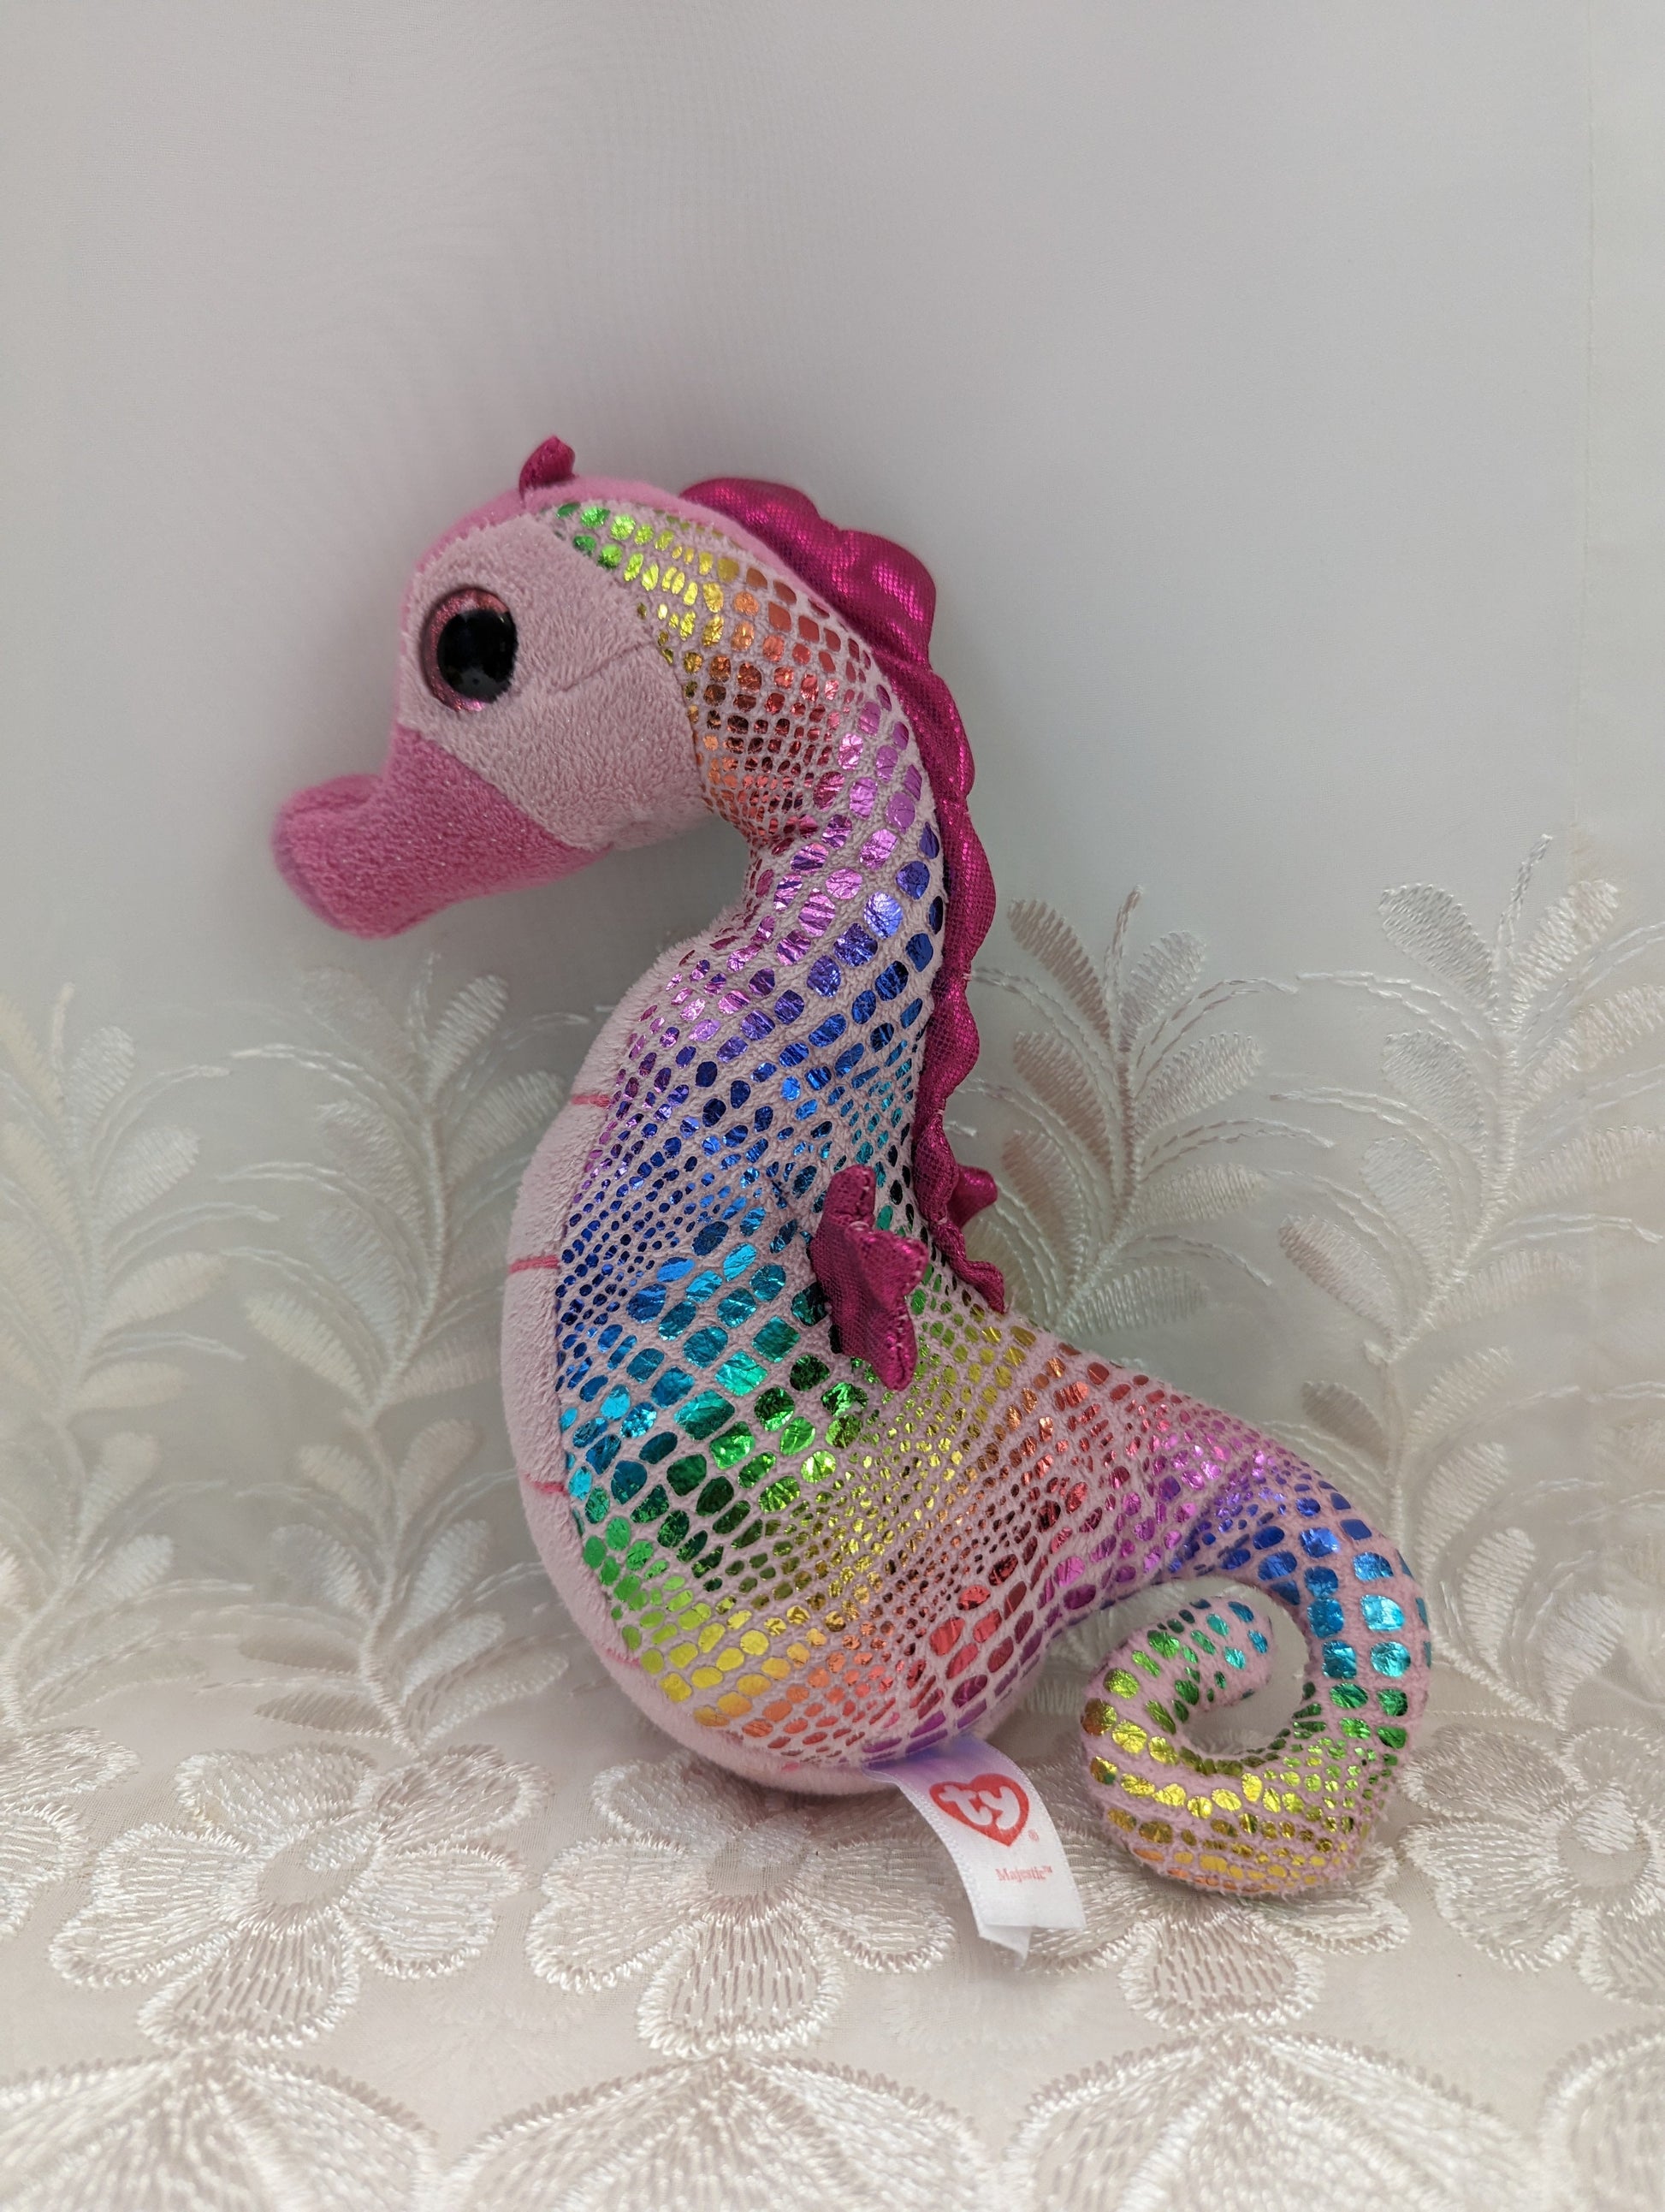 Ty Beanie Baby - Majestic The Seahorse (6in) Metallic Print - No Hang Tag - Vintage Beanies Canada